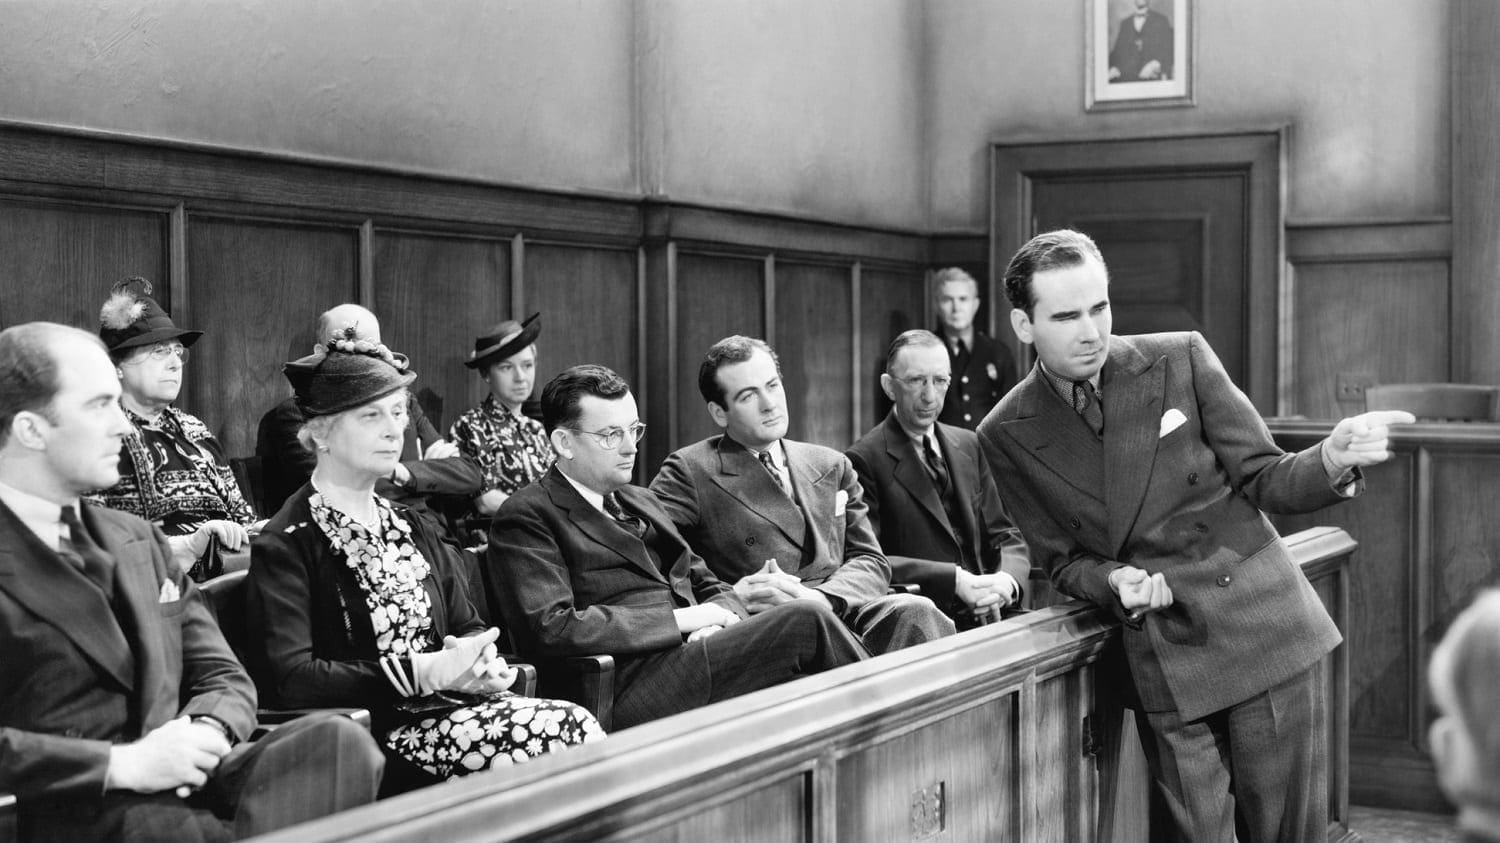 Jury listening to a lawyer's presentation, circa 1940s: Photo 52026511 © Everett Collection Inc. | Dreamstime.com